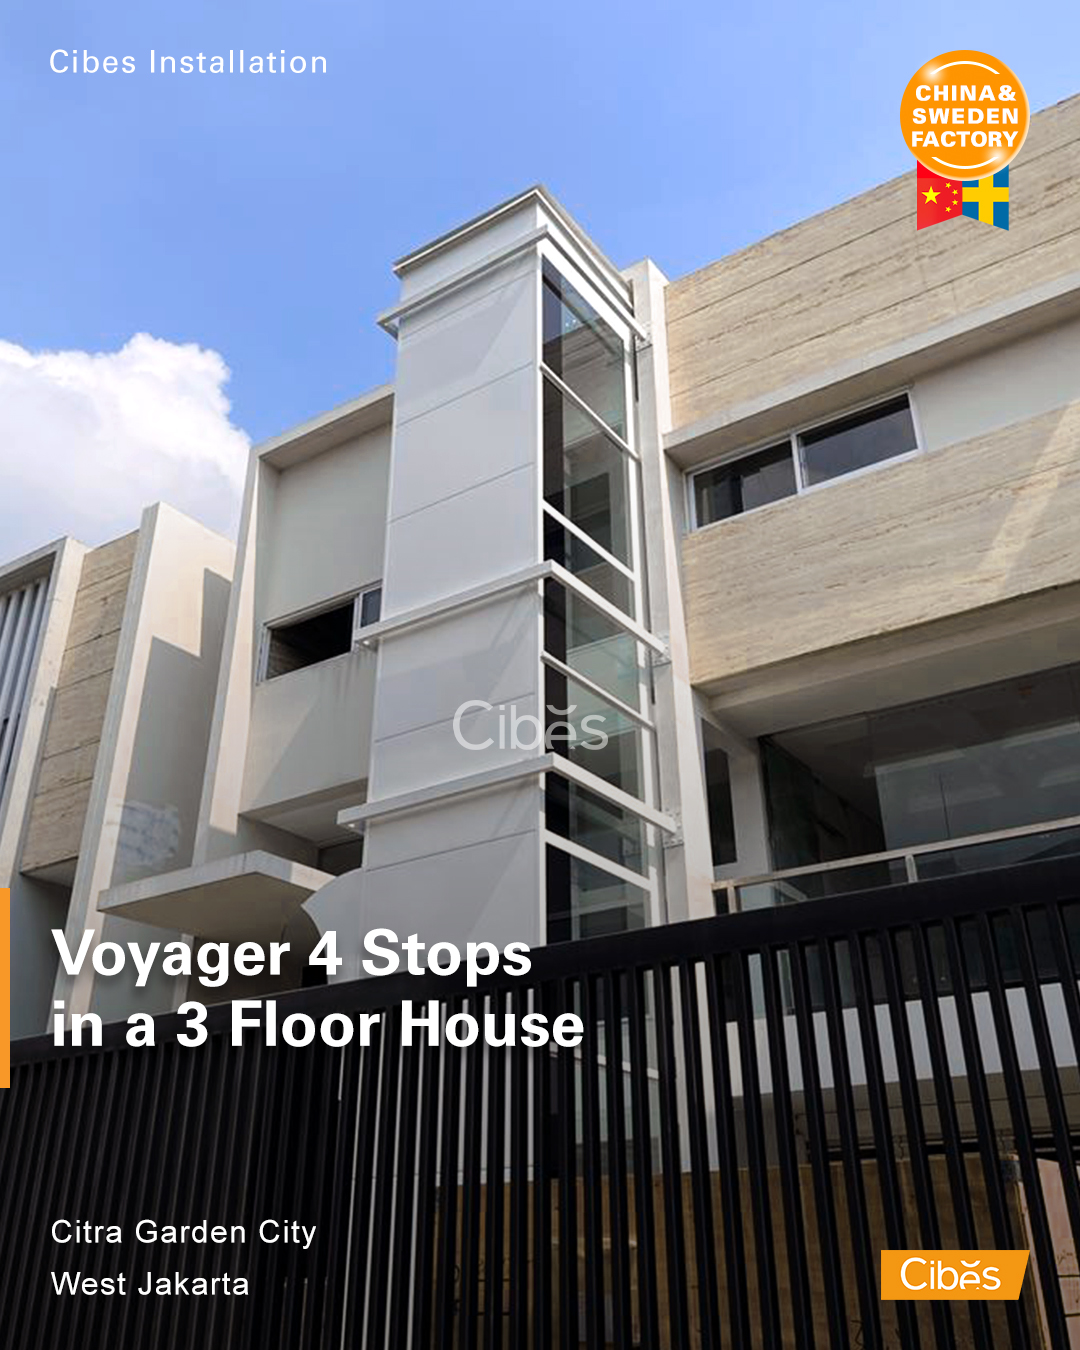 Cibes Voyager 4 Stops in a 3 Floor House